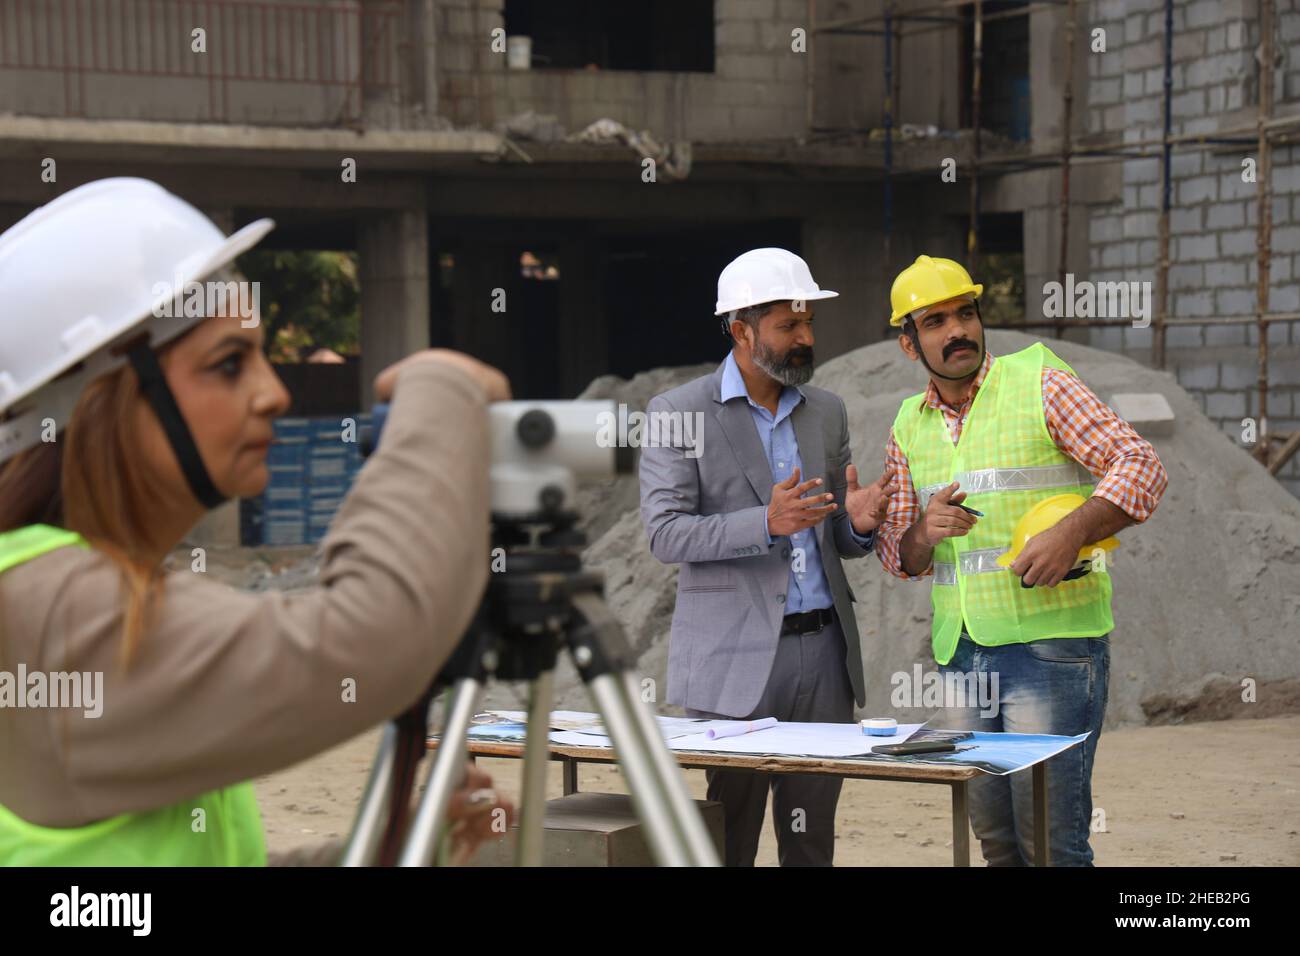 Indian construction workers. Construction engineers working on a builder construction site wearing hardhat. Analyzing blueprint. Stock Photo